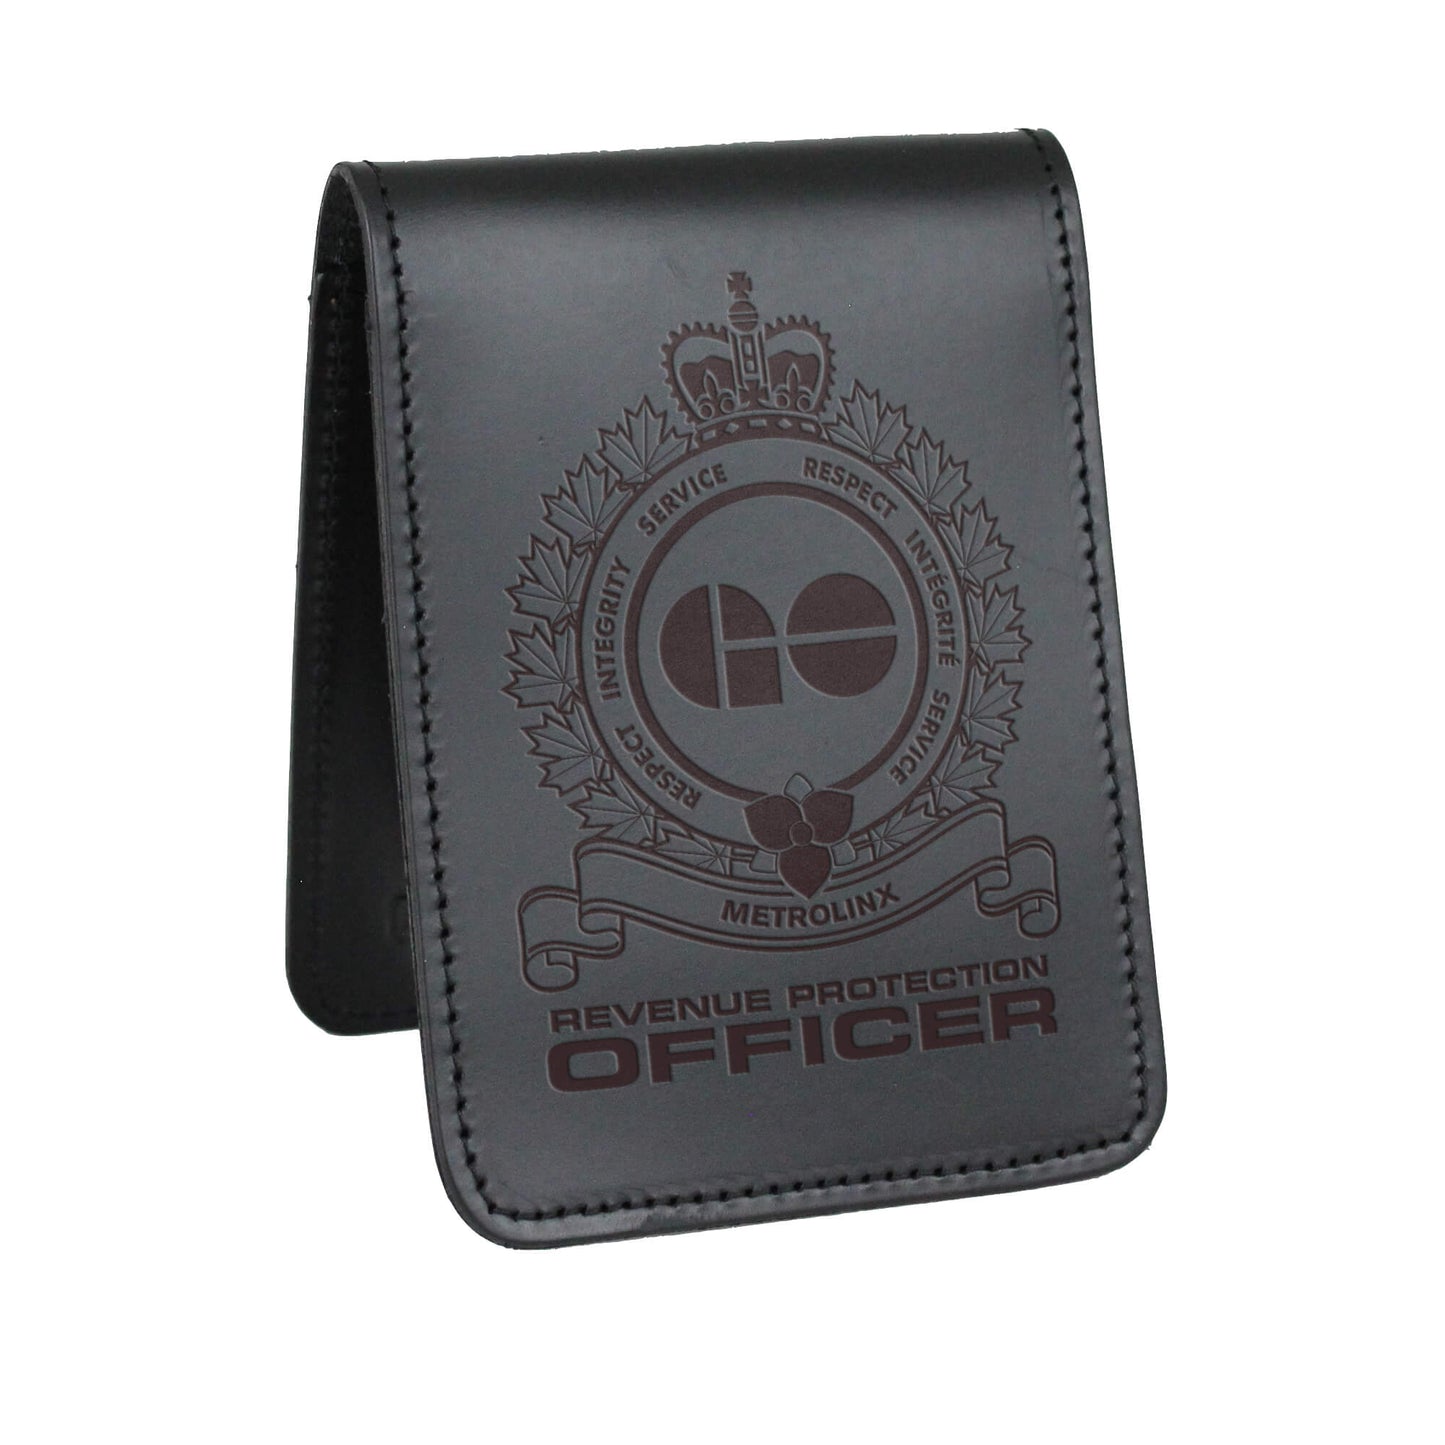 Metrolinx Revenue Protection Officer Notebook Cover-Perfect Fit-911 Duty Gear Canada